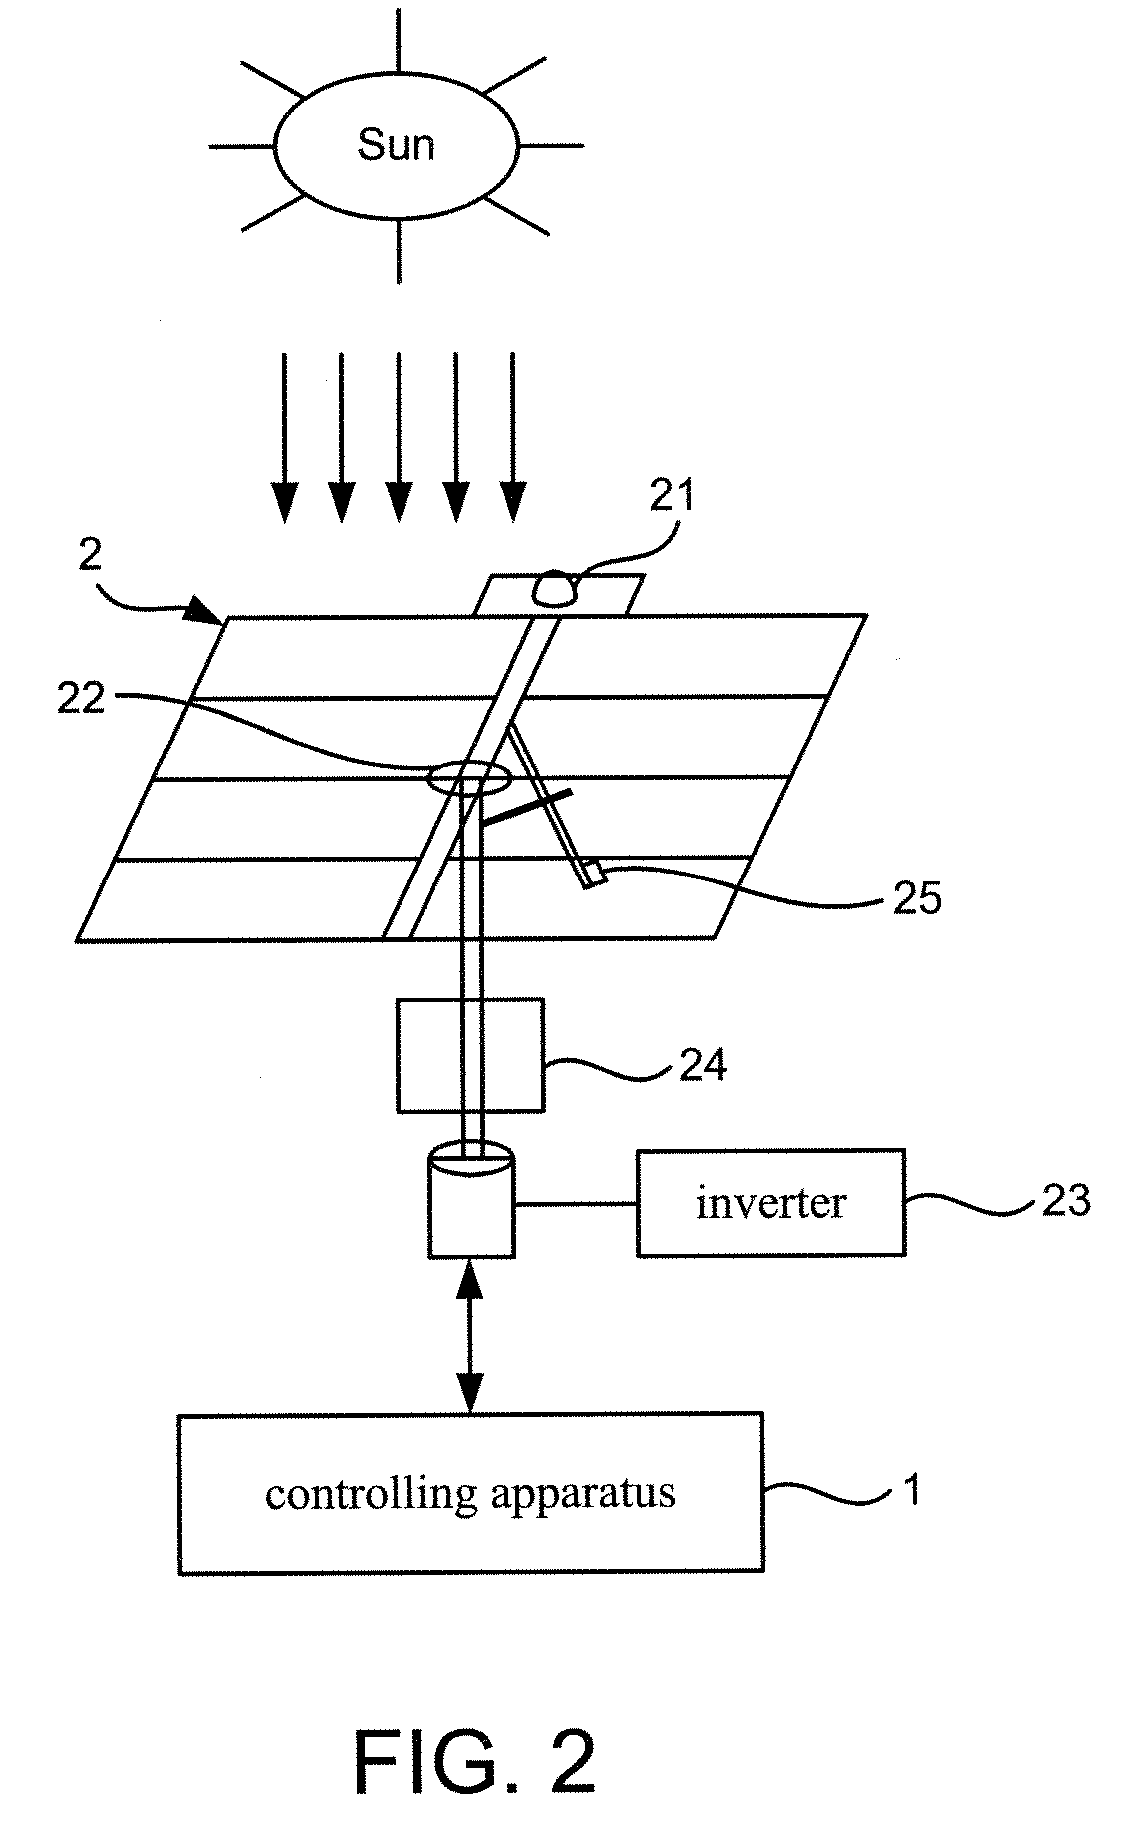 Controlling Apparatus for a Concentration Photovoltaic System